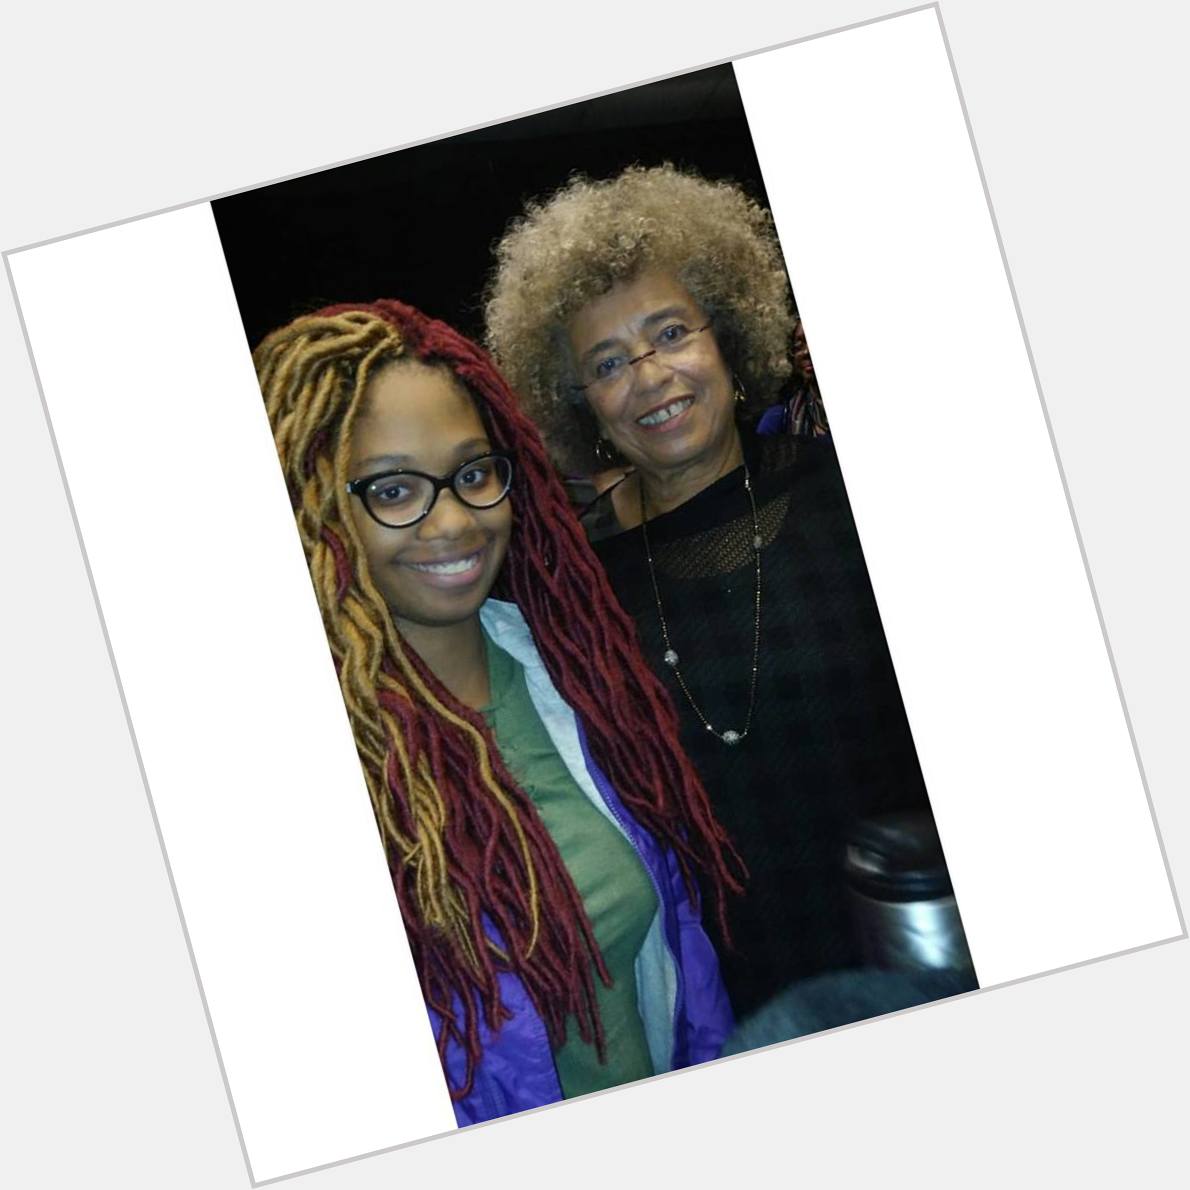 Happy 73rd Birthday, Angela Davis! An intellectual and influence. 